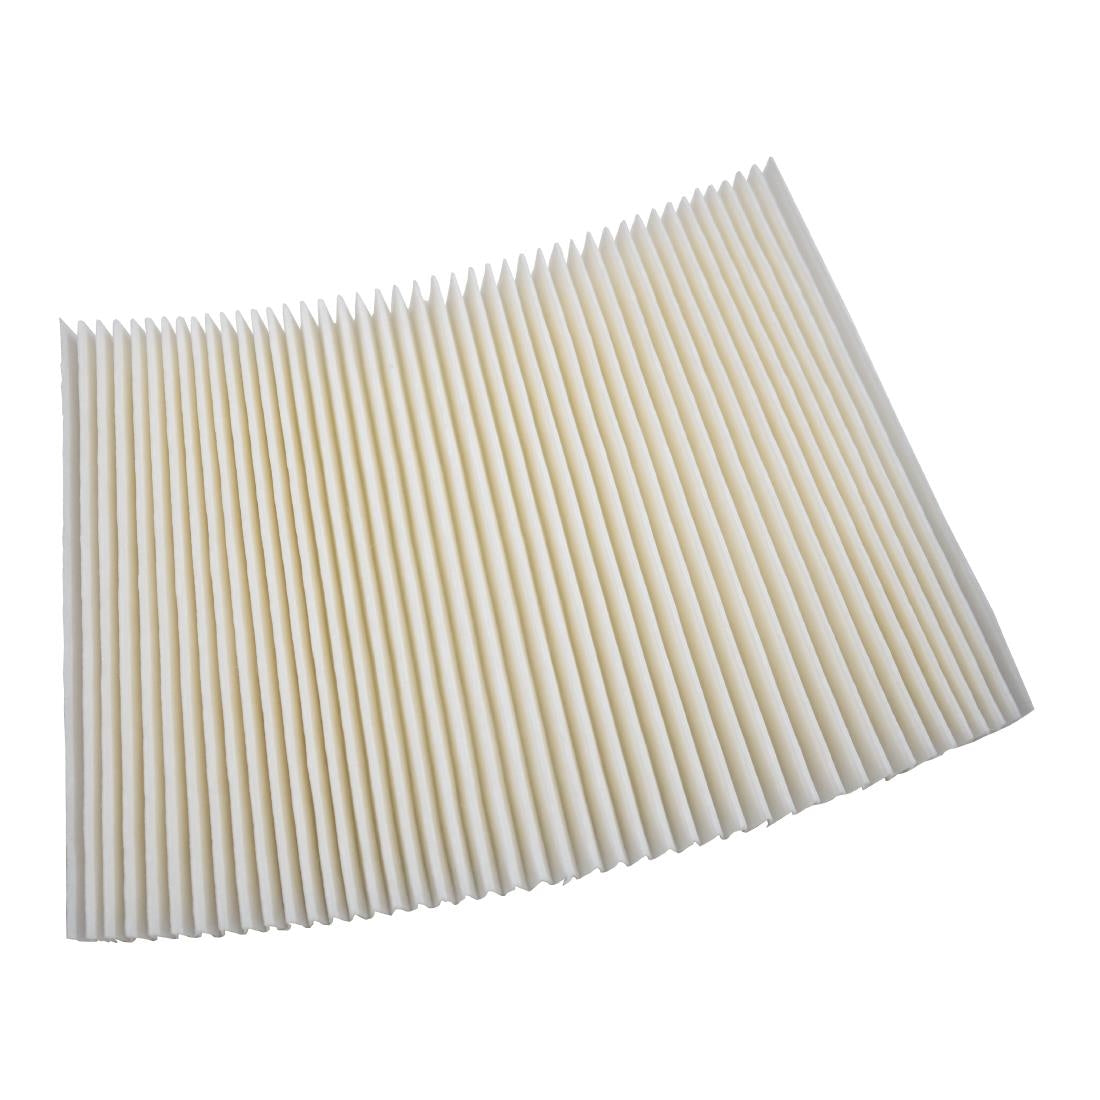 Buffalo Oil Filter Papers for CU489 Oil Filtration Machine (Pack of 100) JD Catering Equipment Solutions Ltd